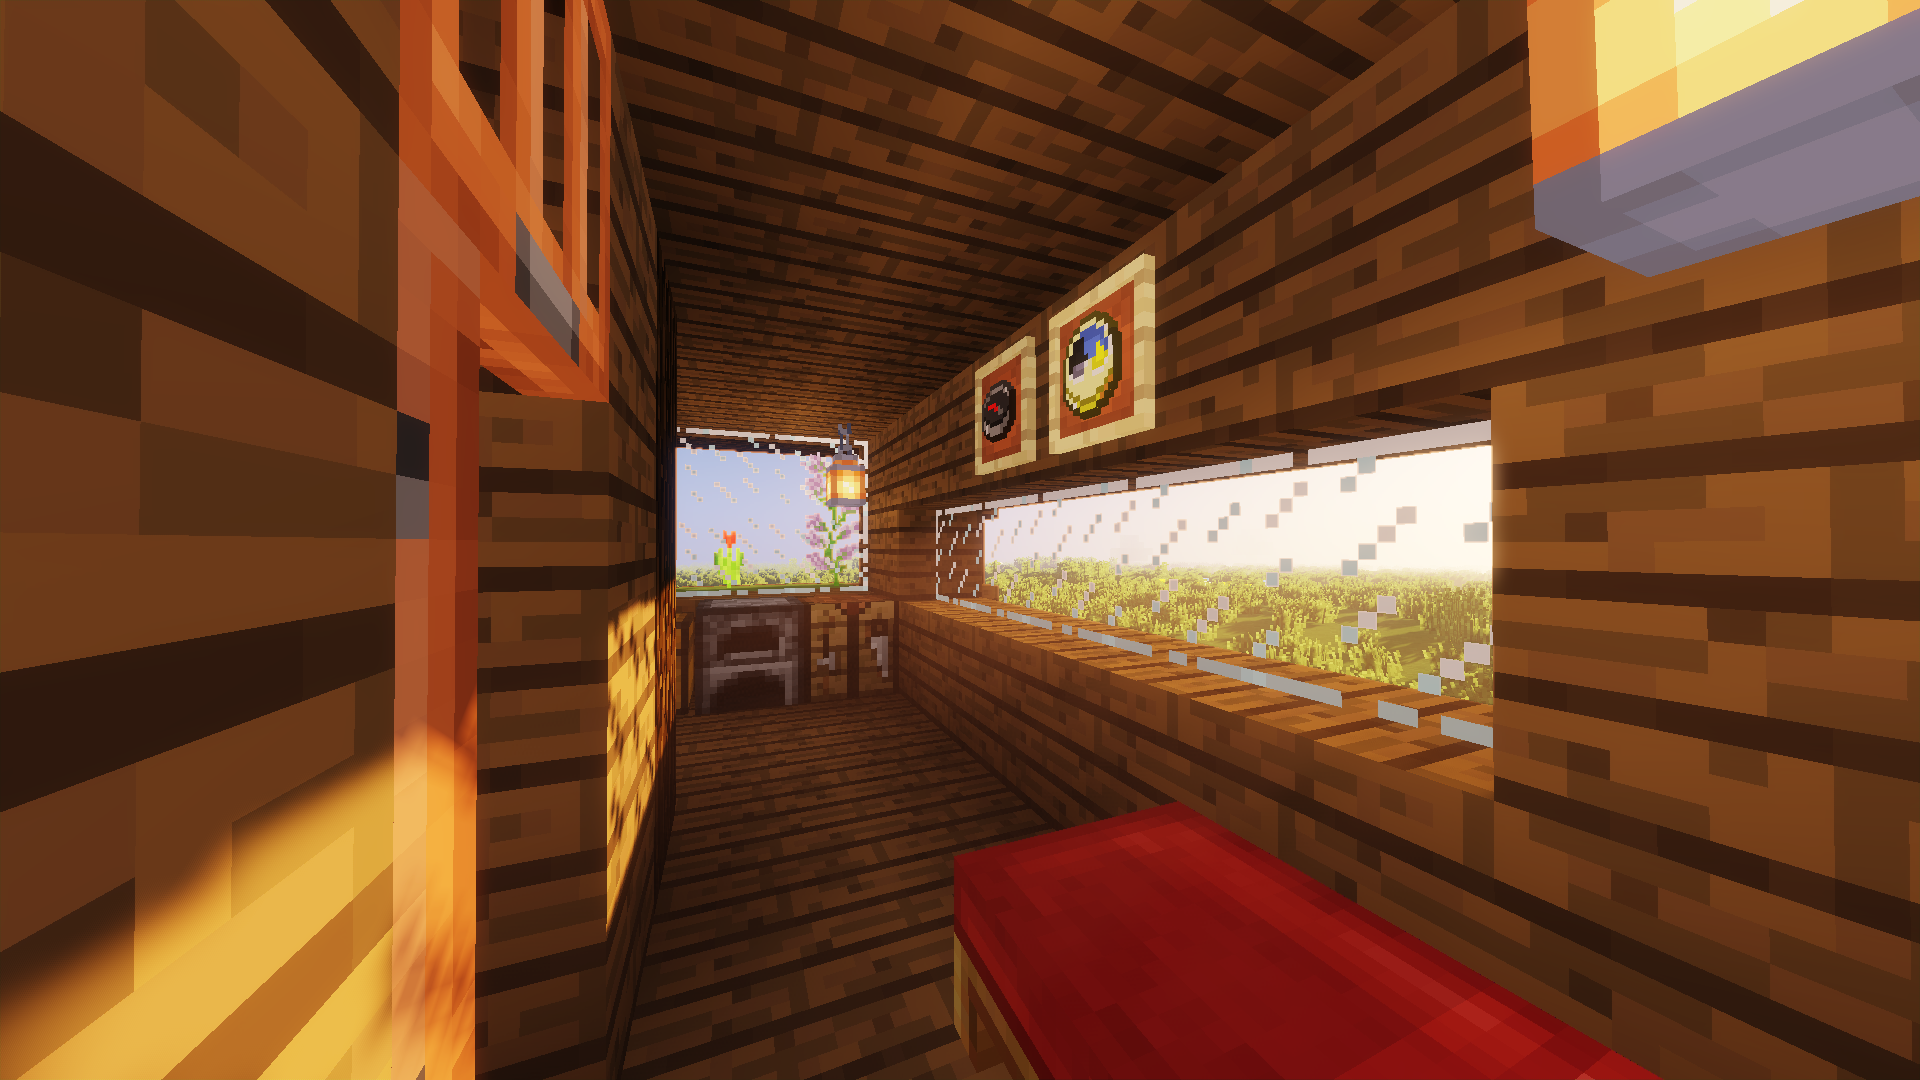 Minecraft Shaders Relaxing Daylight Calm Chill Out 1920x1080